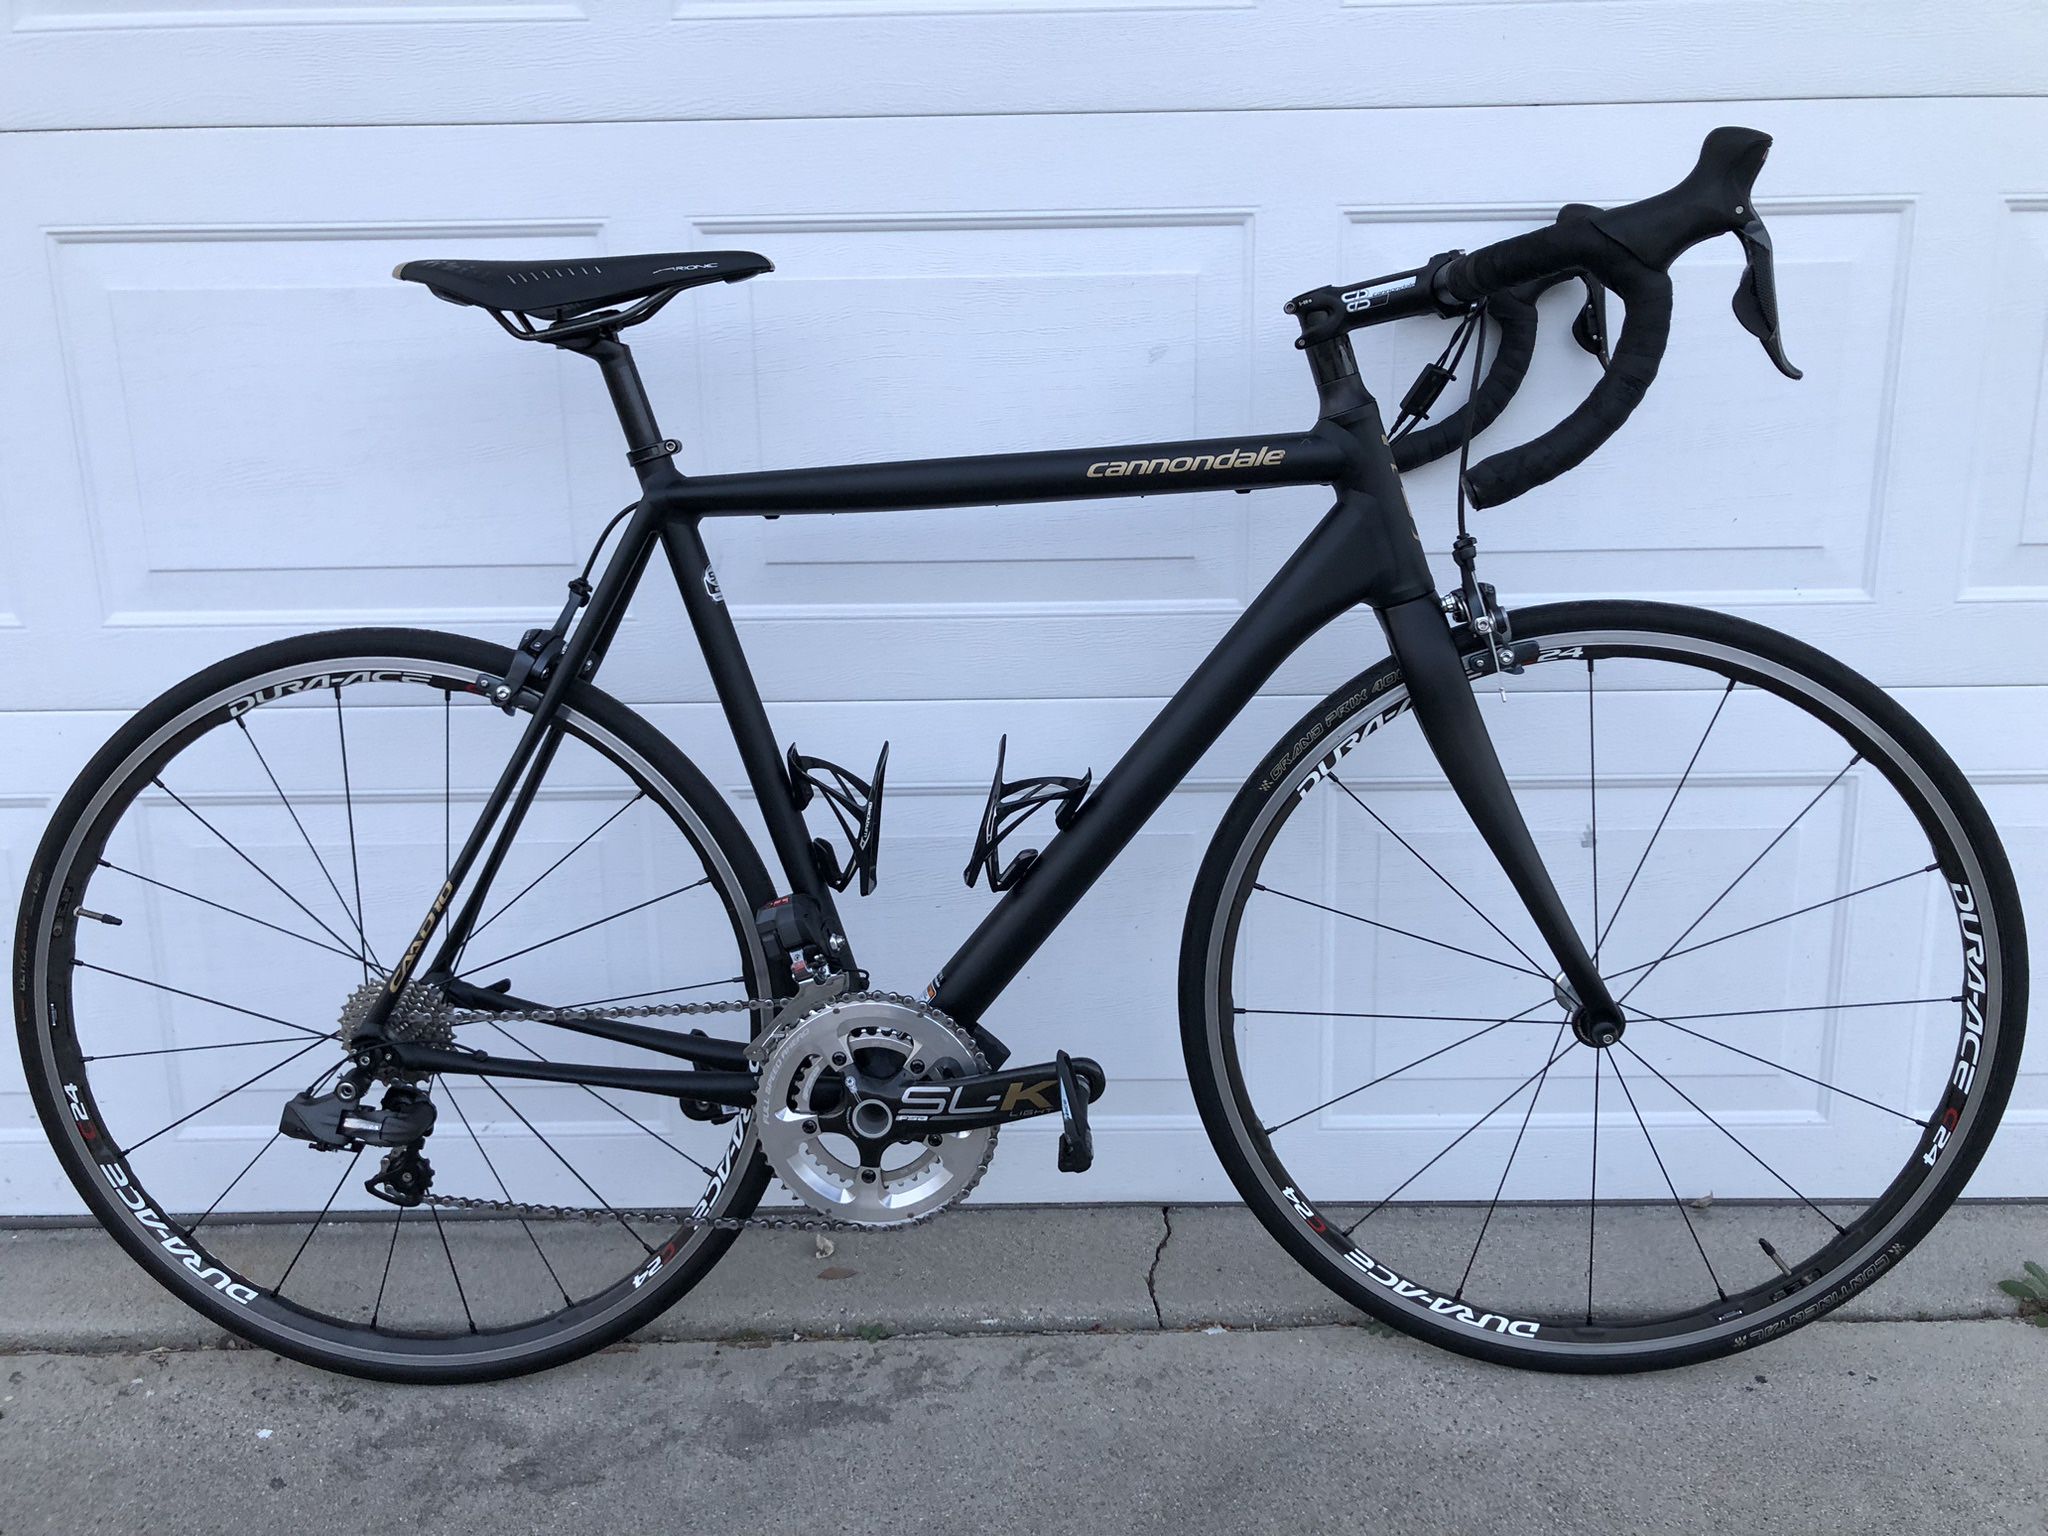 Cannondale CAAD10 Black INC Di2 drivetrain will be charged and ready to go. Charger included. $1100 set price takes it